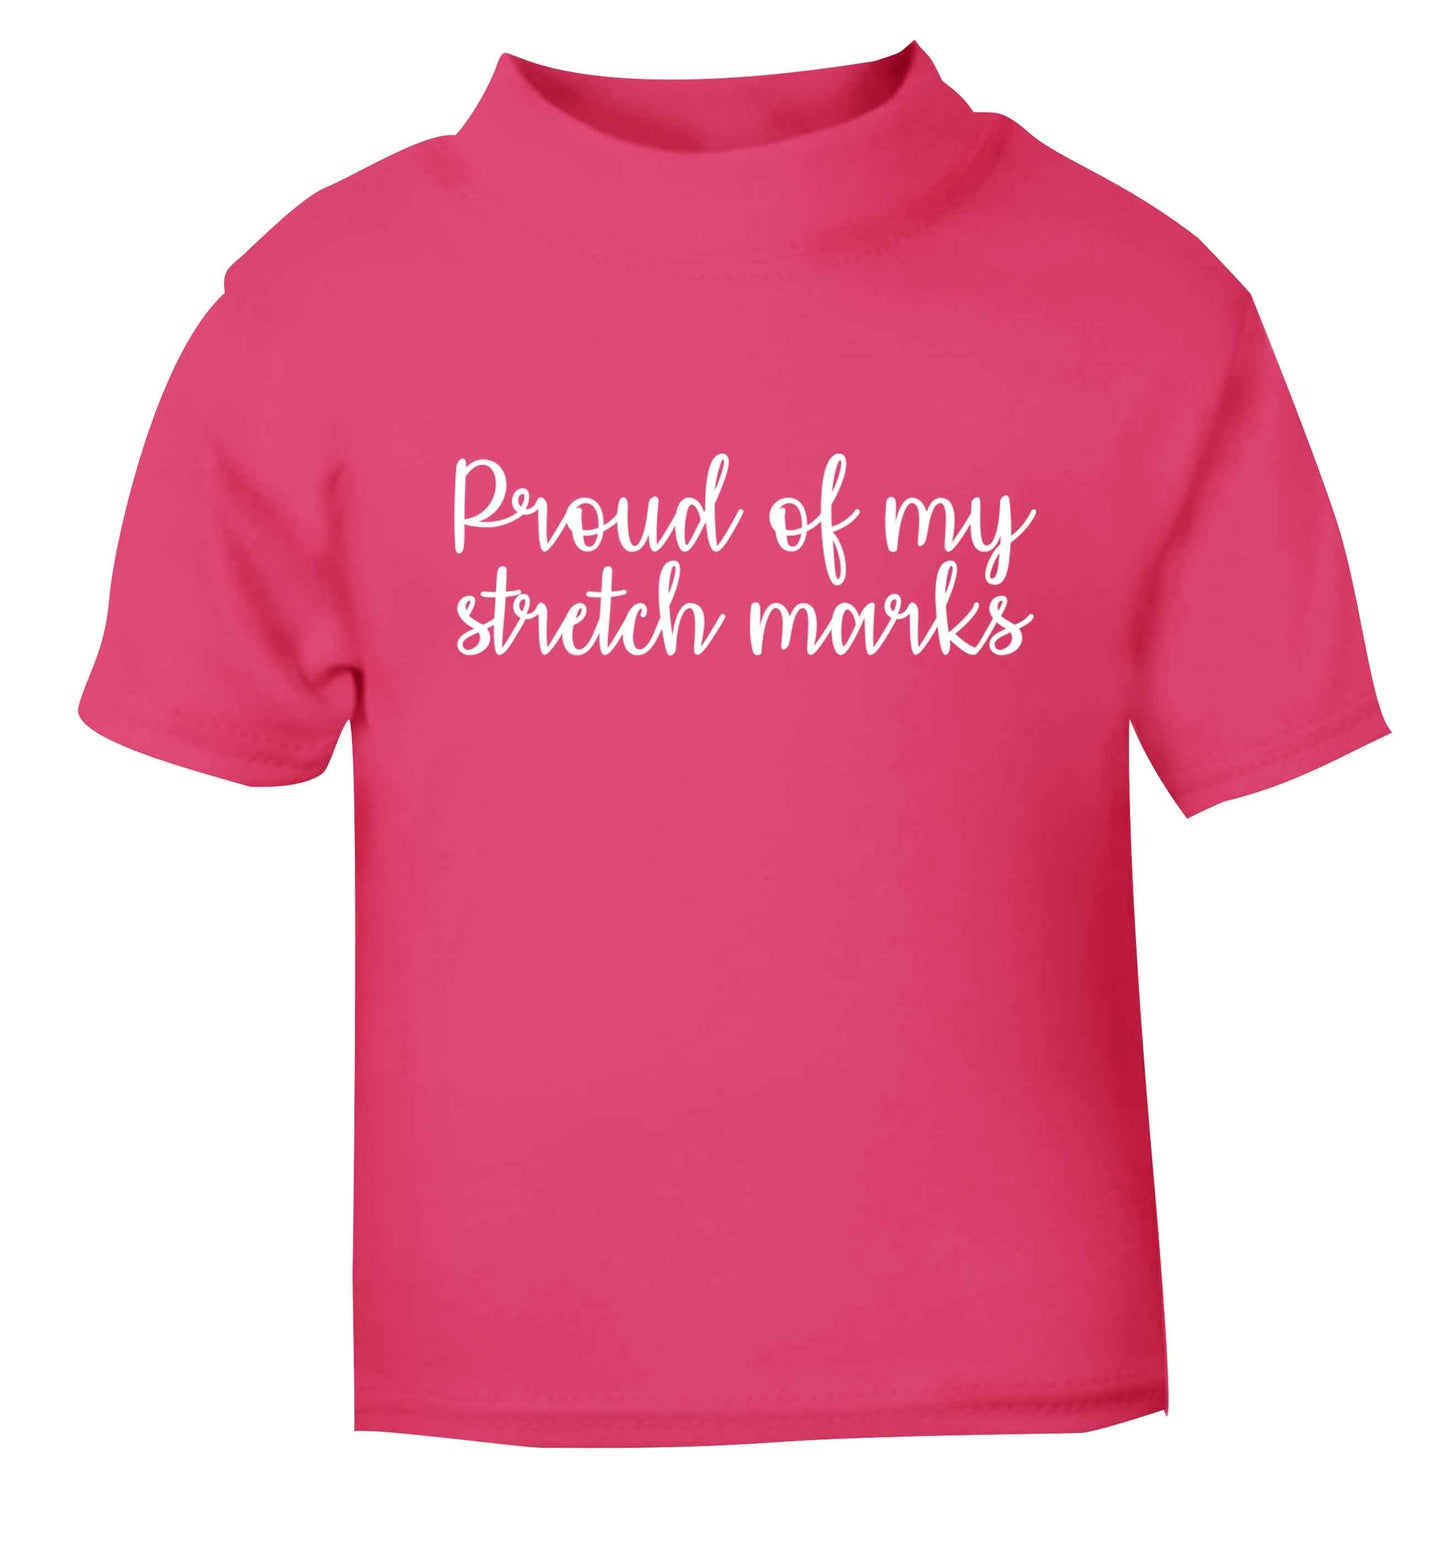 Proud of my stretch marks pink baby toddler Tshirt 2 Years